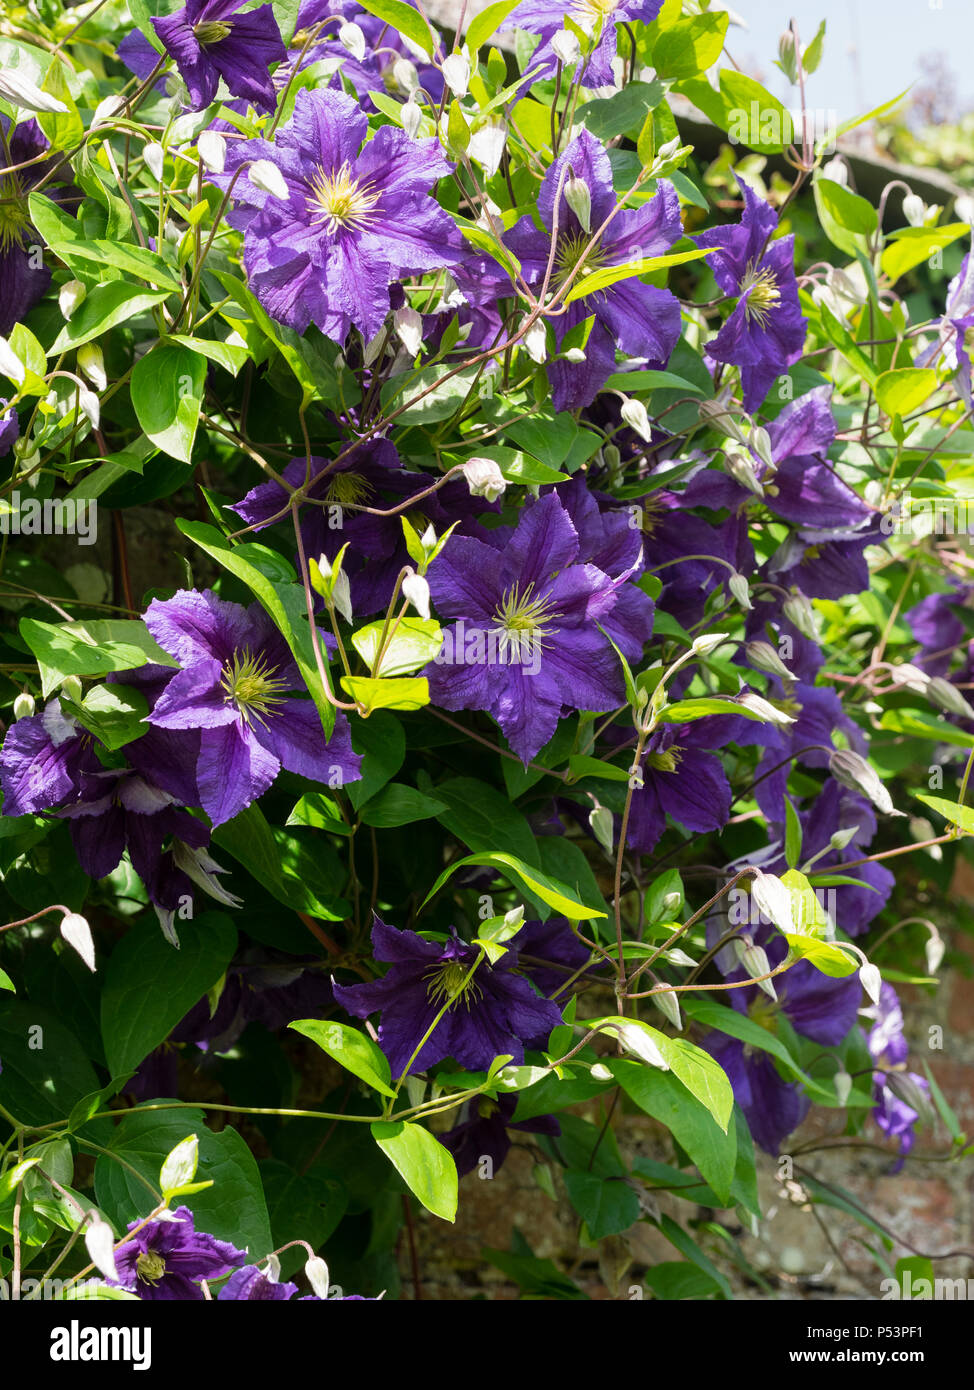 Singe blue-violet summer flowers of the hardy climber, Clematis viticella 'Wisley' Stock Photo